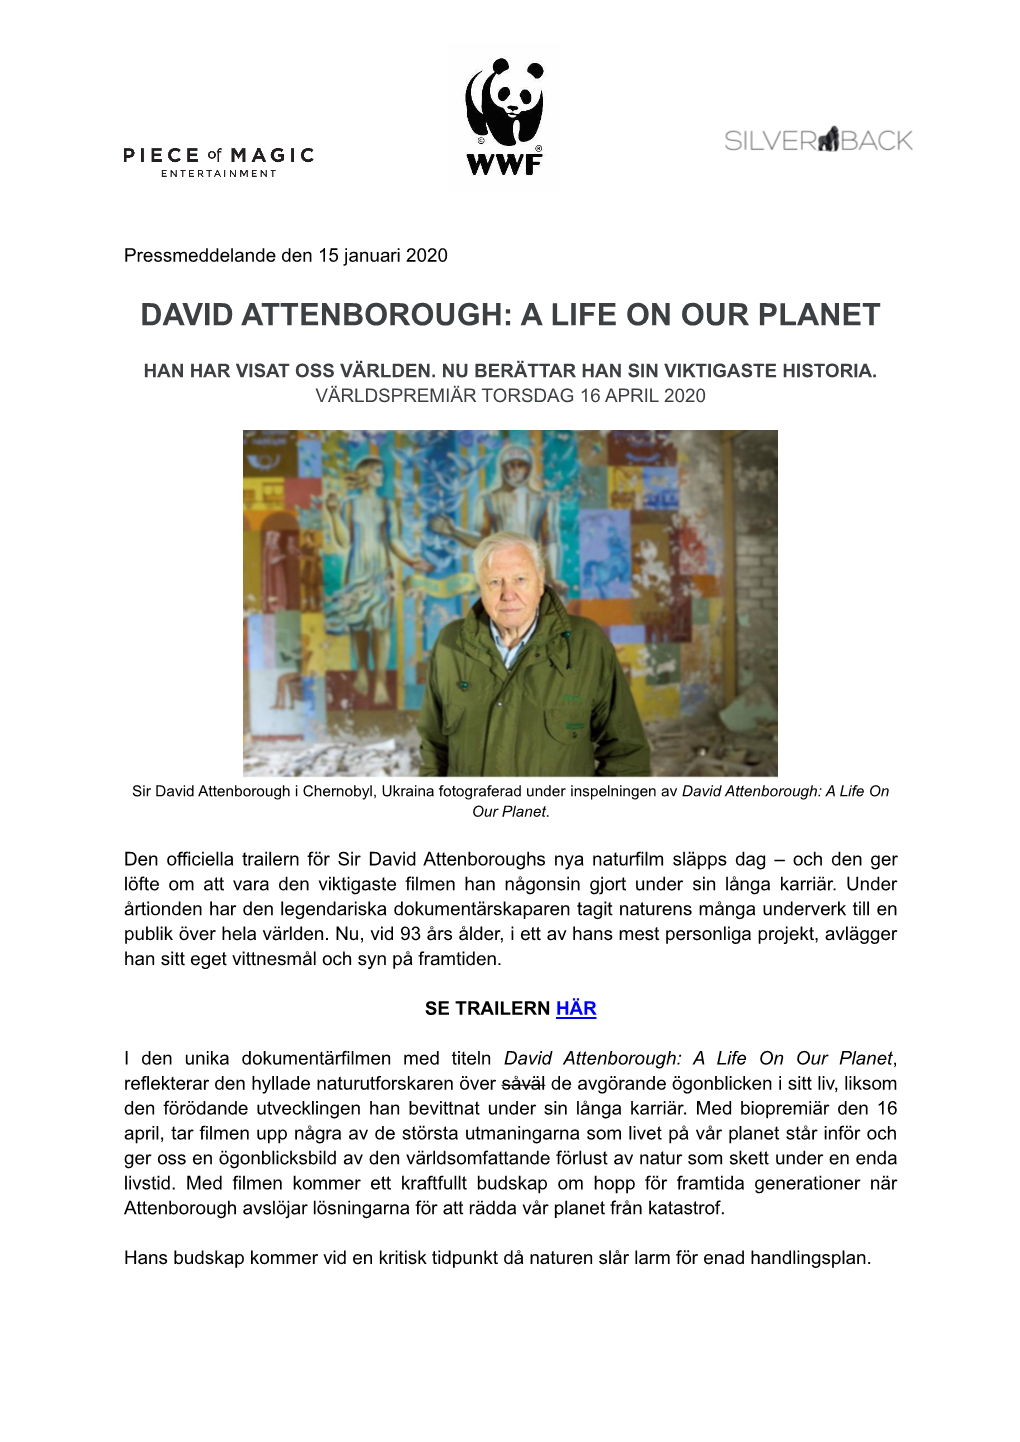 David Attenborough: a Life on Our Planet